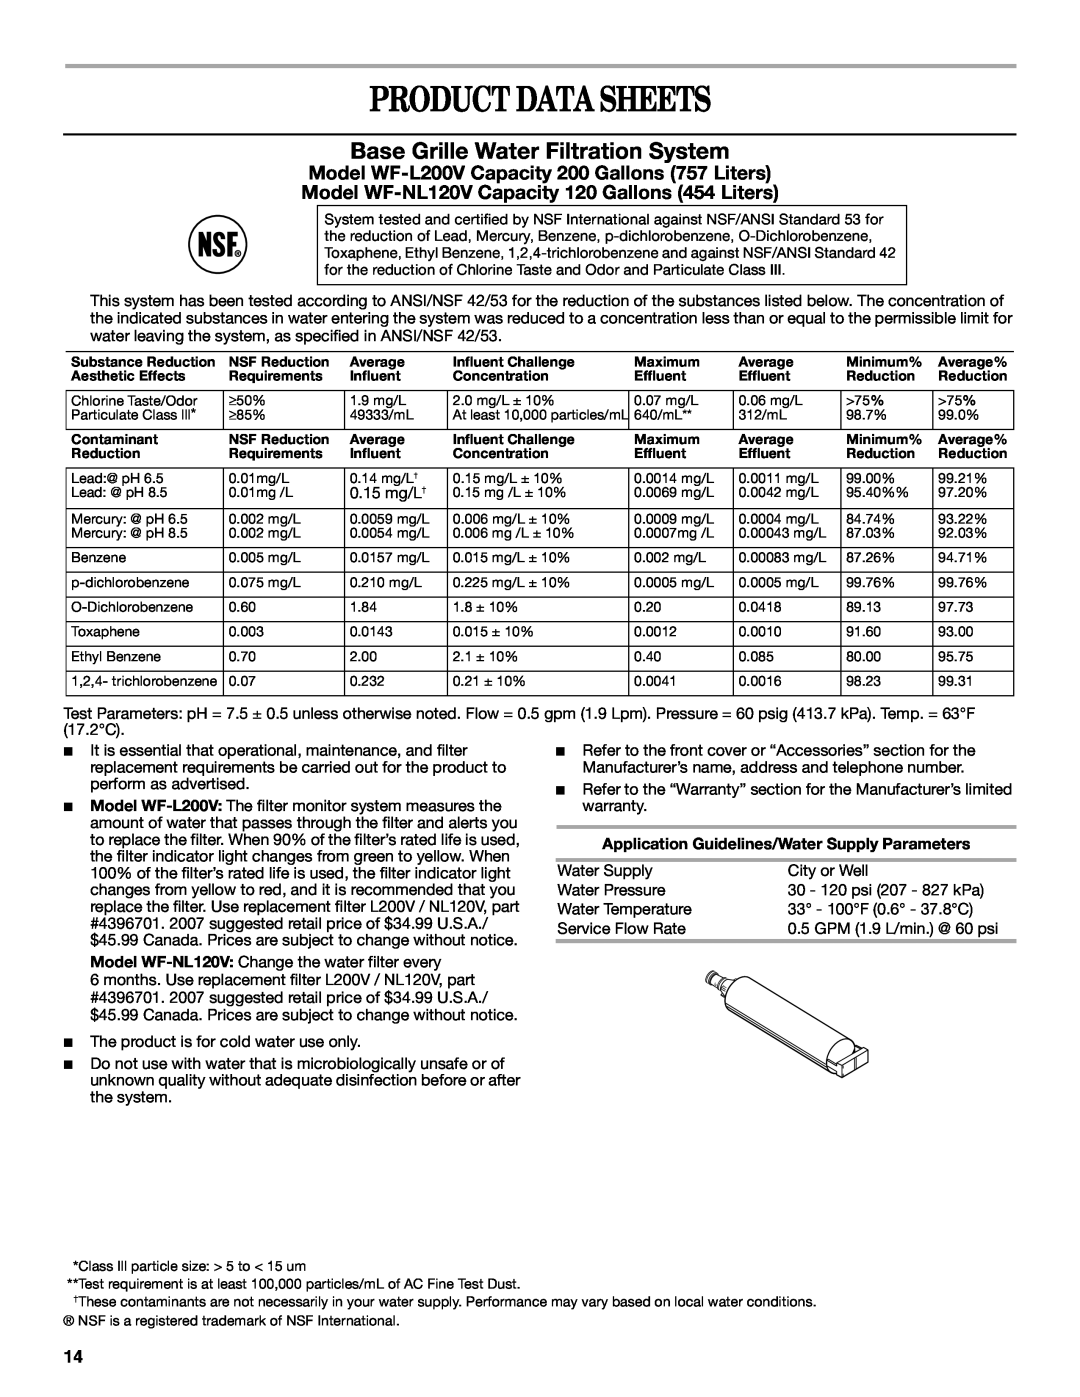 Whirlpool GR2FHTXV installation instructions Product Data Sheets, Base Grille Water Filtration System 